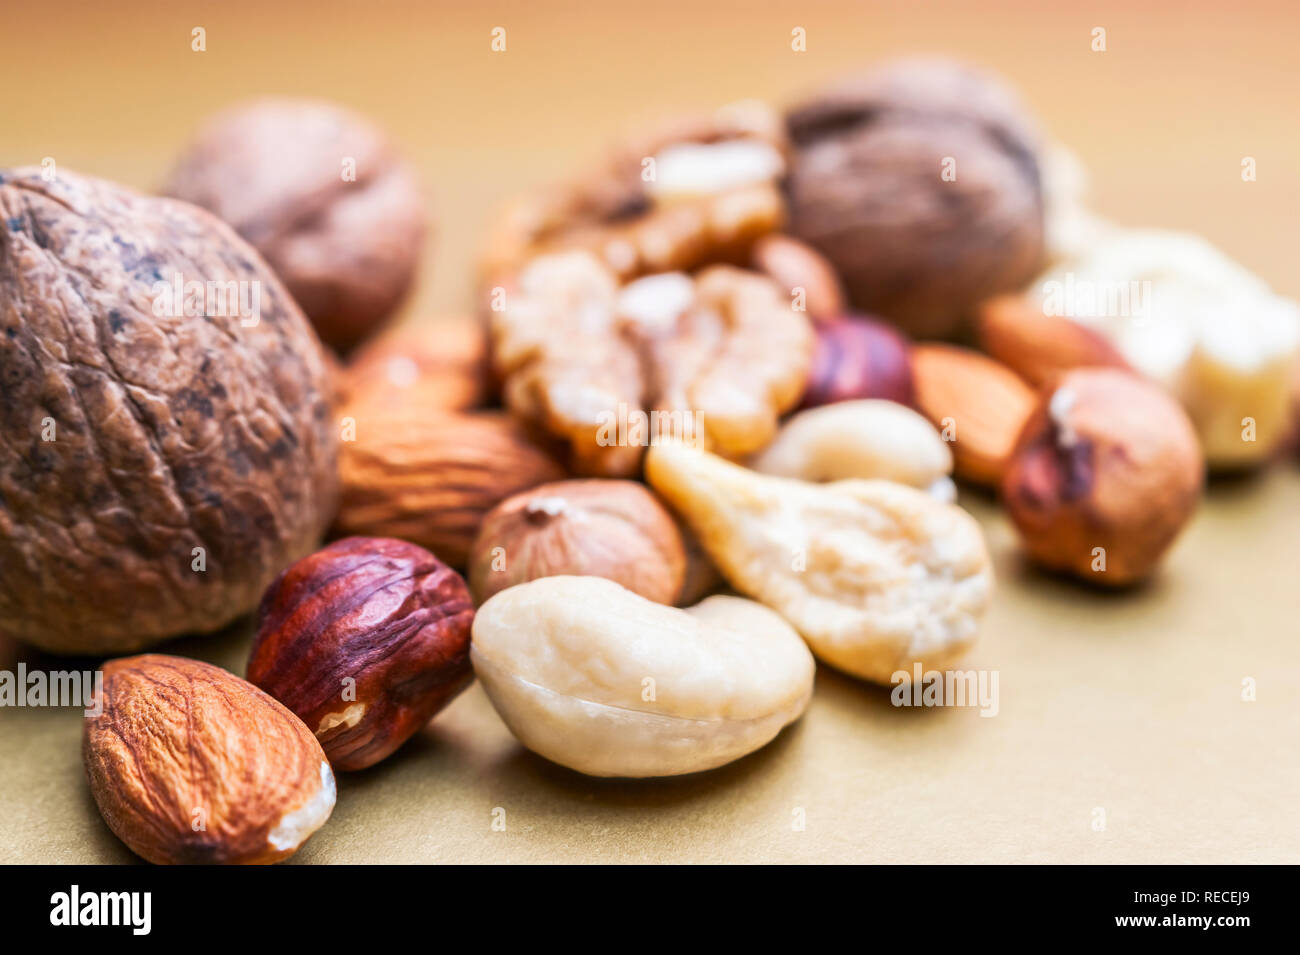 Almonds, Hazelnuts, Cashew Nuts and Whole Walnuts on Golden Background. Healthy Organic Snack, Breakfast, Food Ingredients Stock Photo